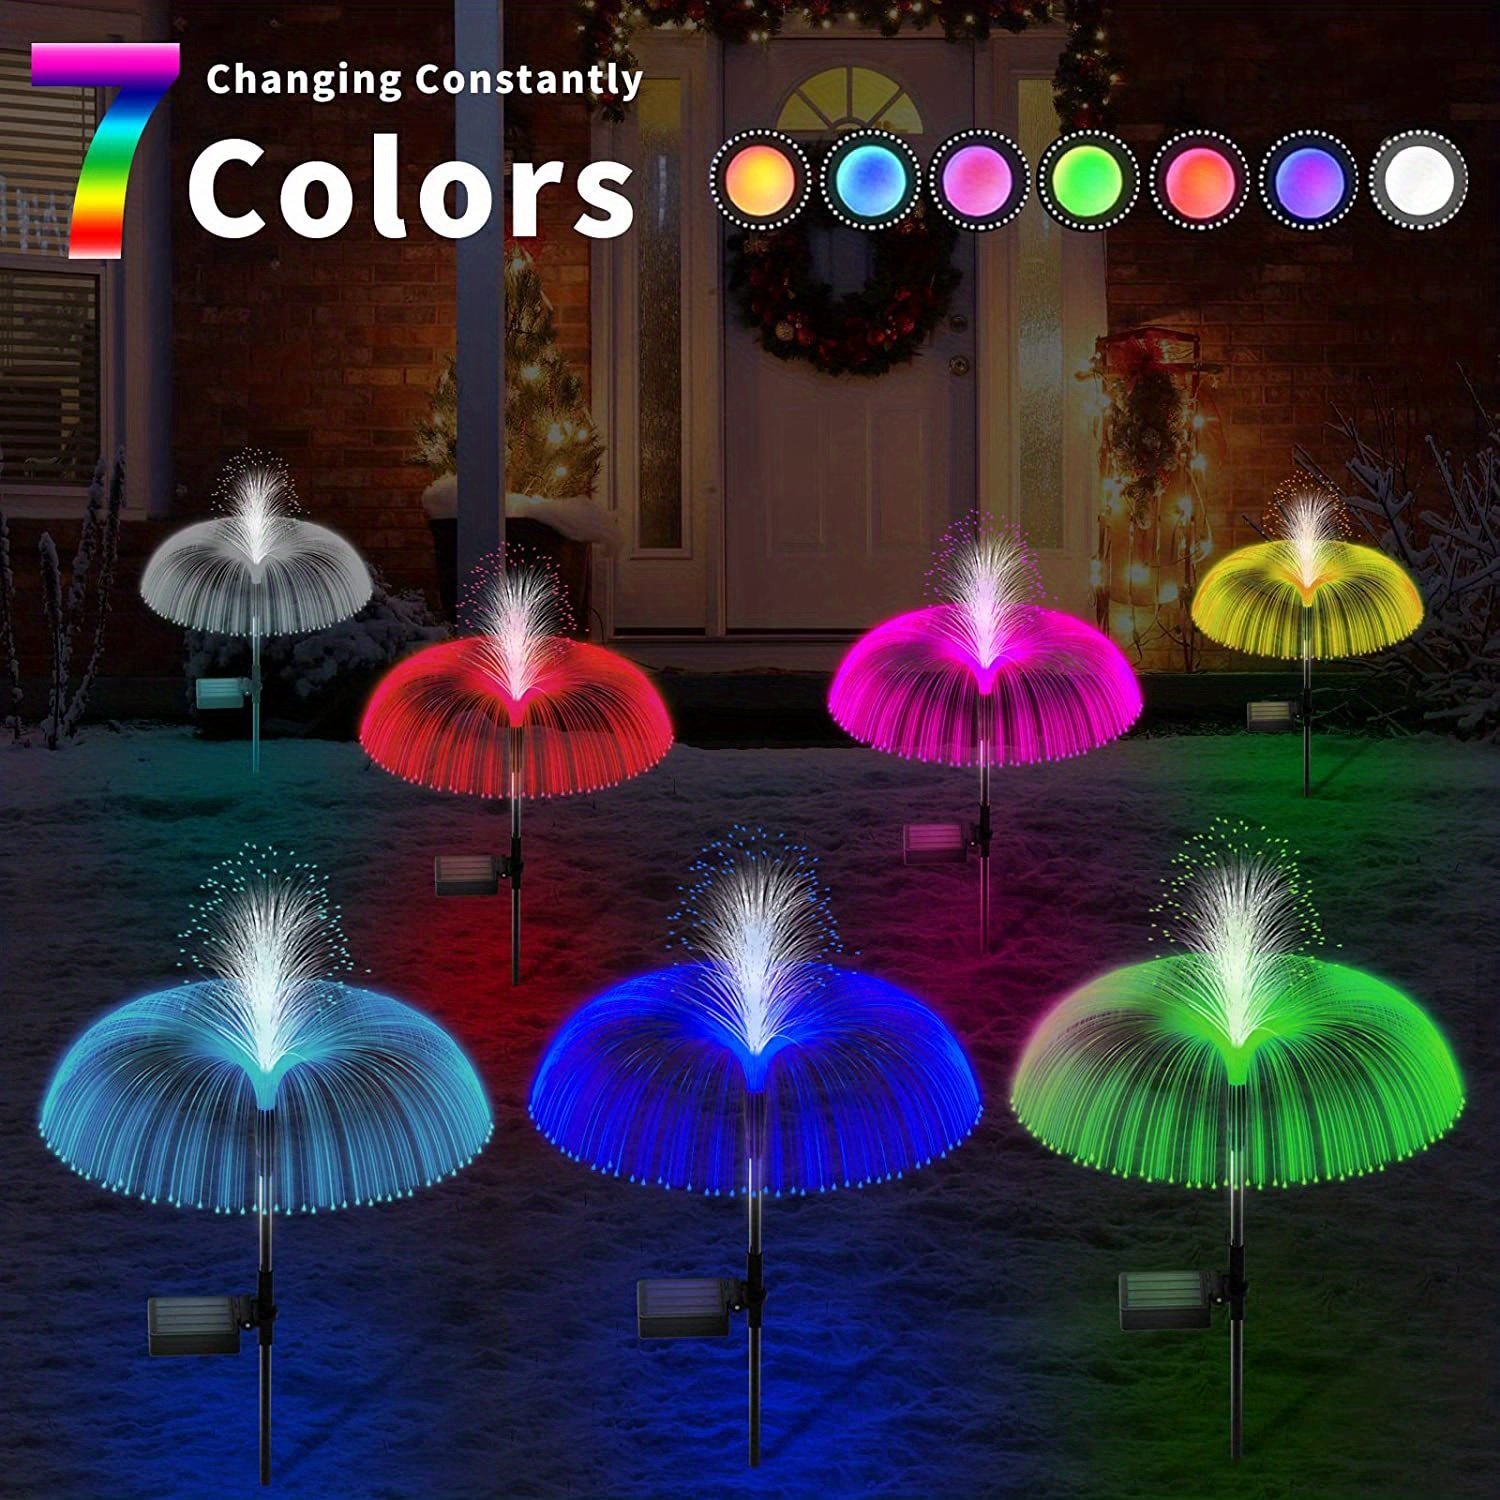 waterproof solar flower fountain lights color changing solar yard light outside decorations solar garden lights stake decor for pathway patio lawn party wedding holiday birthday details 4